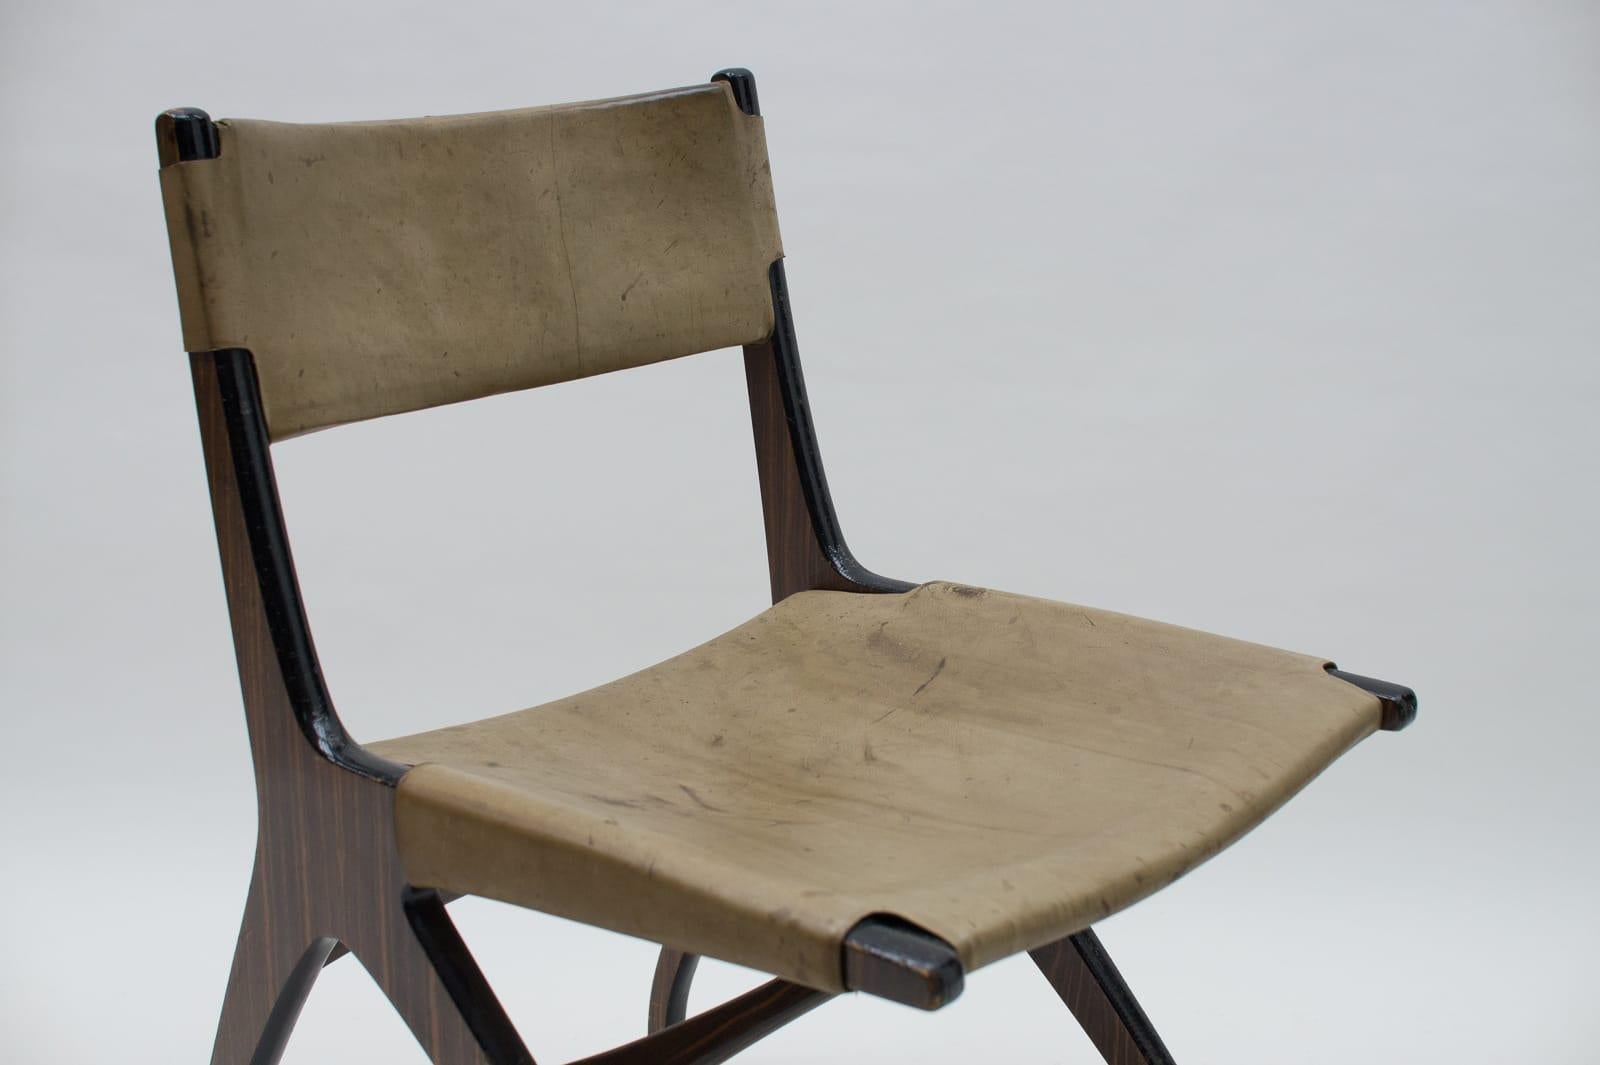 Italian Wooden Chair with Leather Upholstery, 1960s For Sale 5